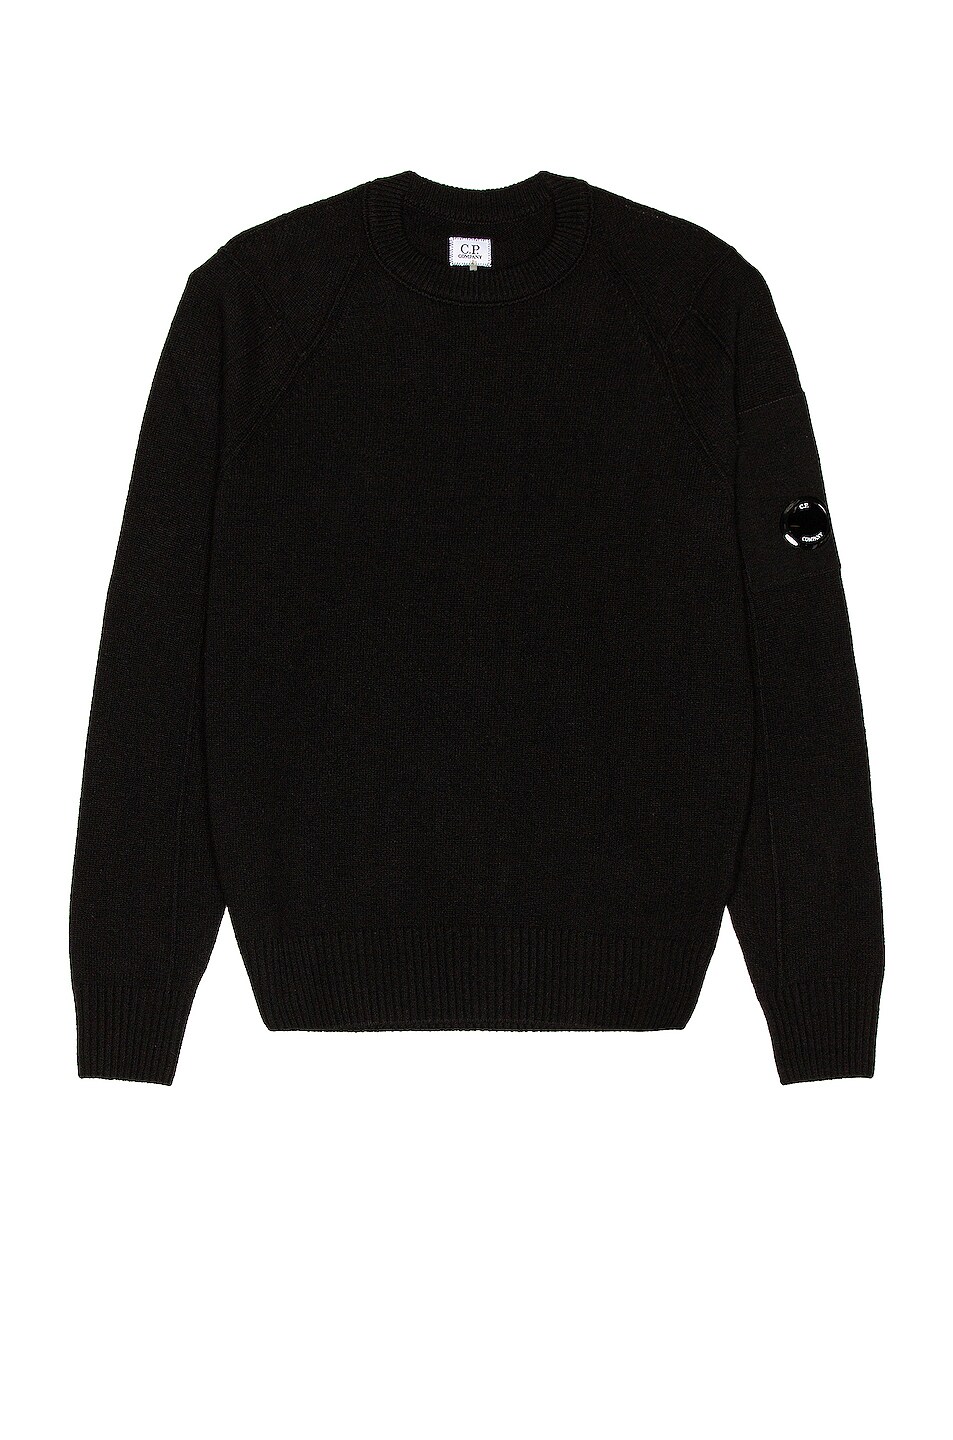 Image 1 of C.P. Company Lambswool Knit Crew Neck in Black